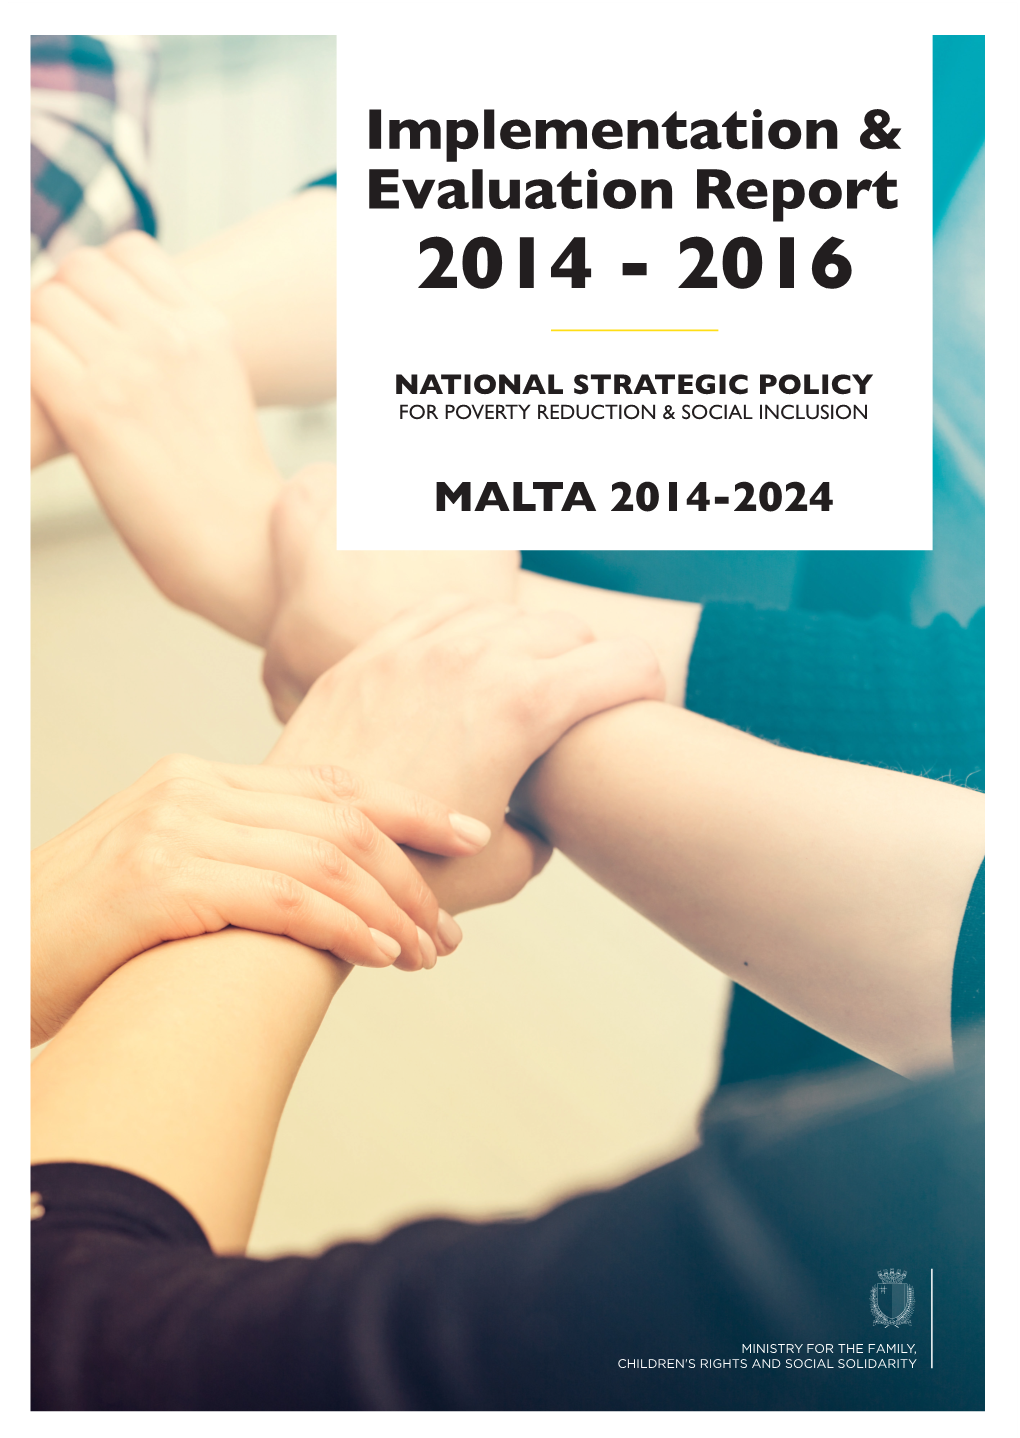 Implementation and Evaluation Report (2014 – 2016)